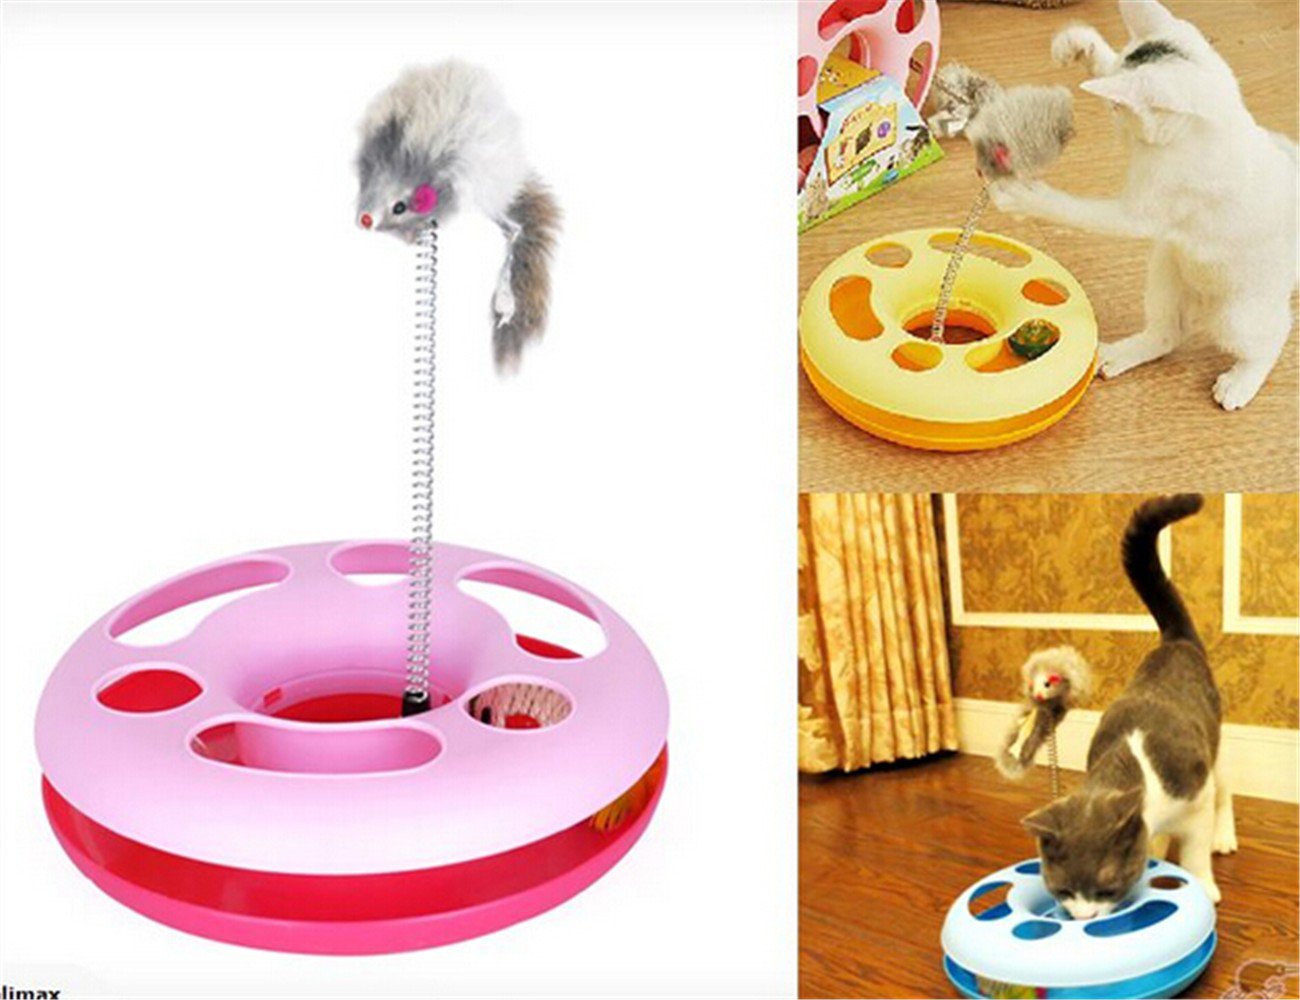 Cat Toys Plus 2 In 1 Toy With Mouse Shaped Swatter And Ball Track